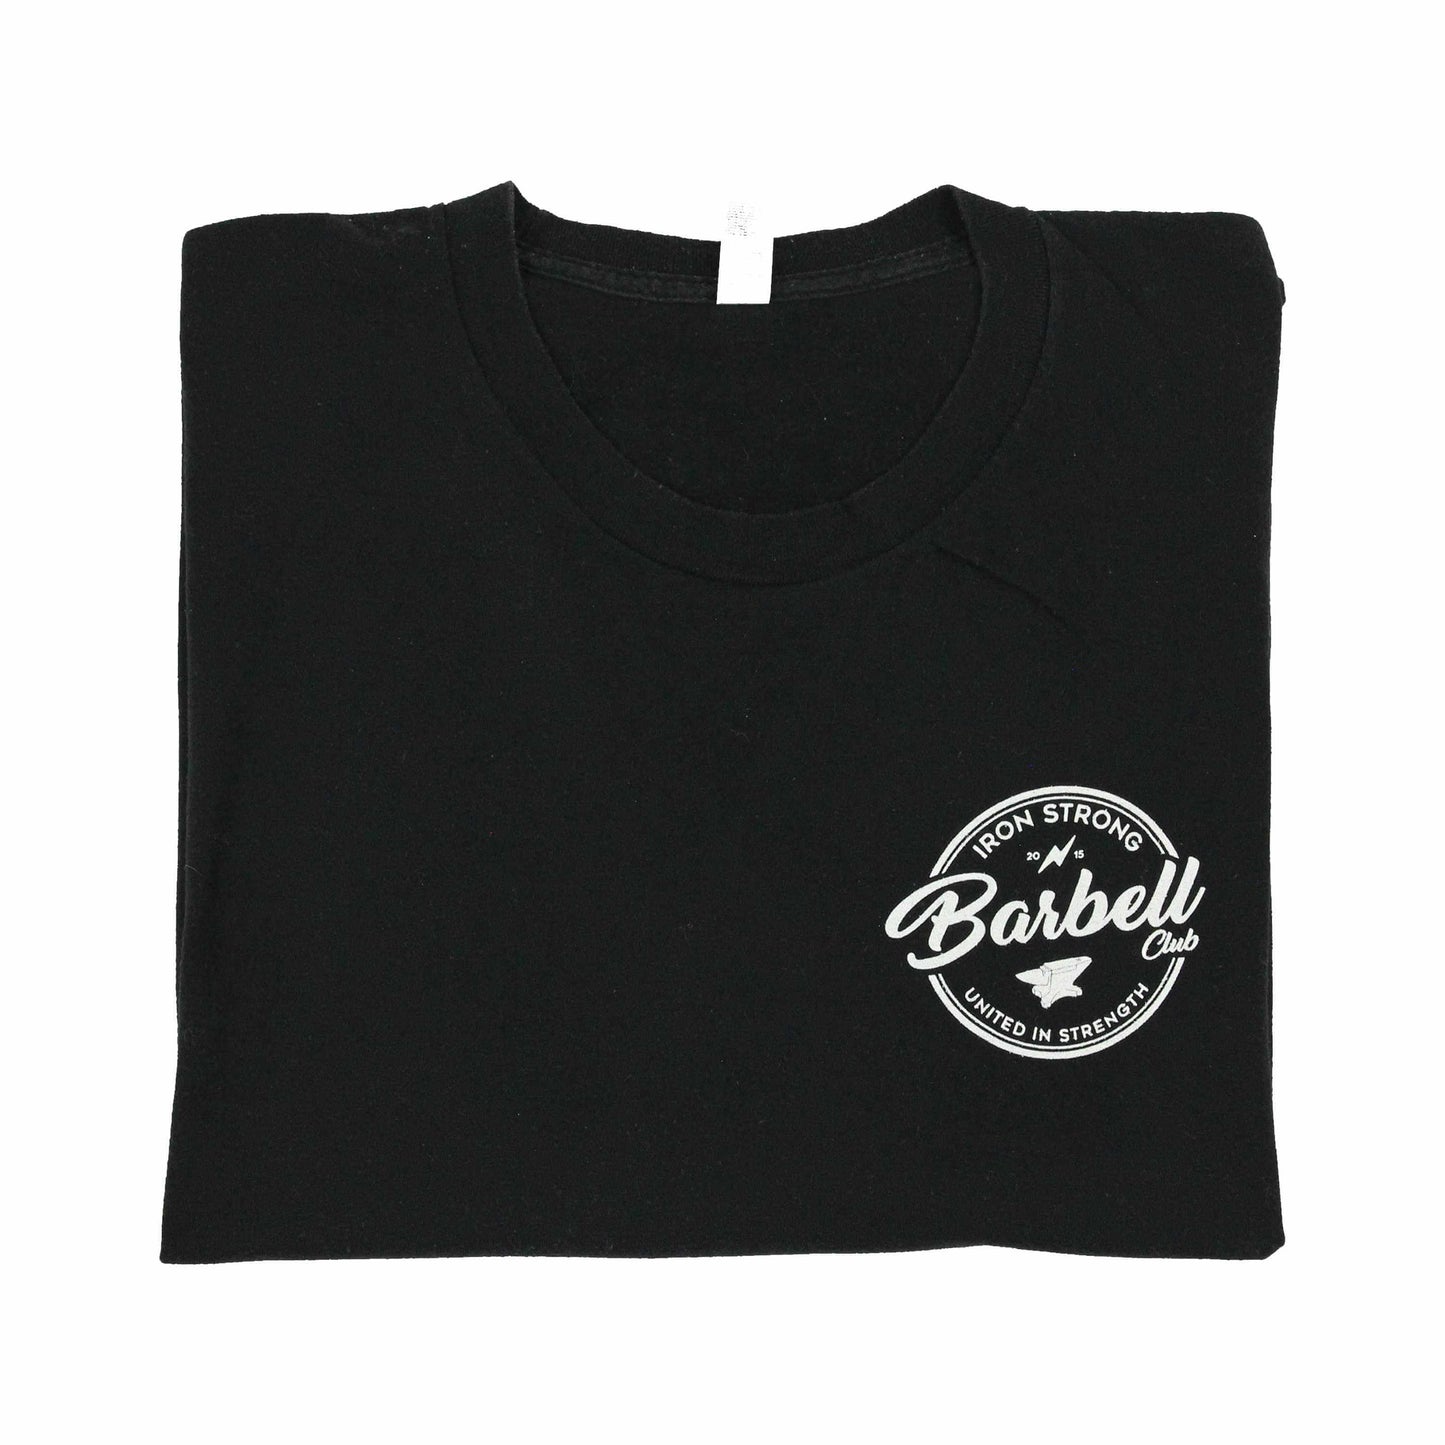 The 'Barbell Club 2.0' Weightlifting Shirt folded | Iron Strong Apparel